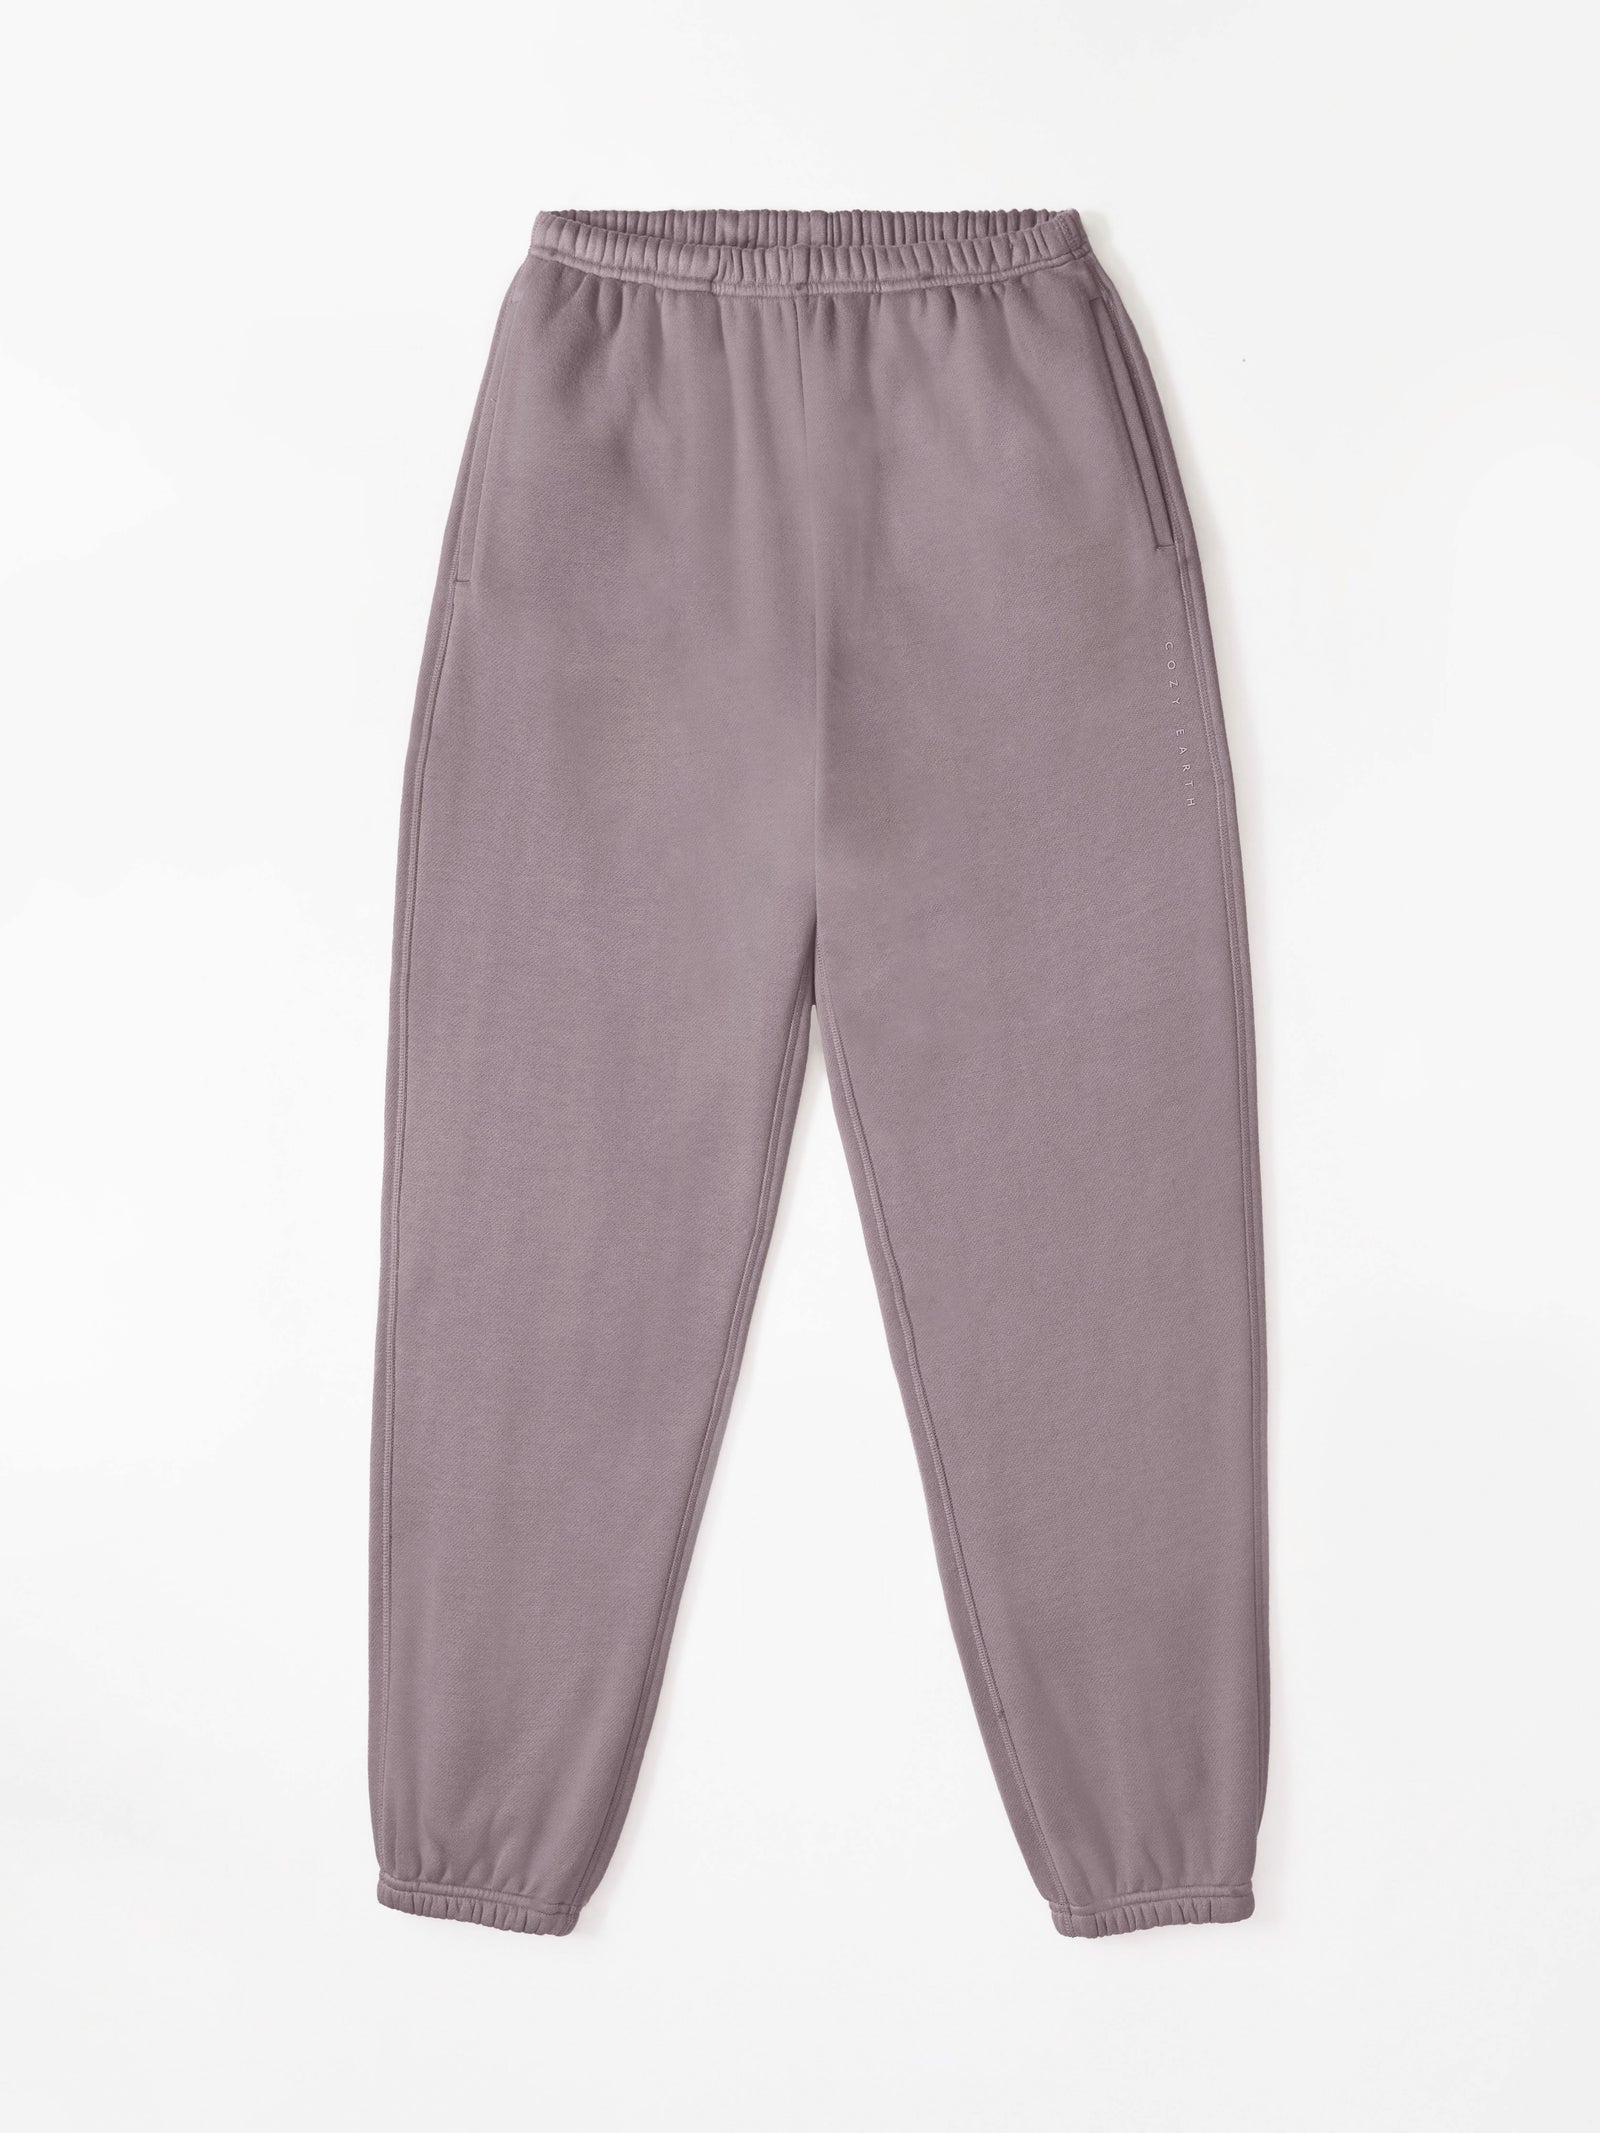 Dusty Orchid CityScape Joggers. The Joggers are laying flat over a white background. 